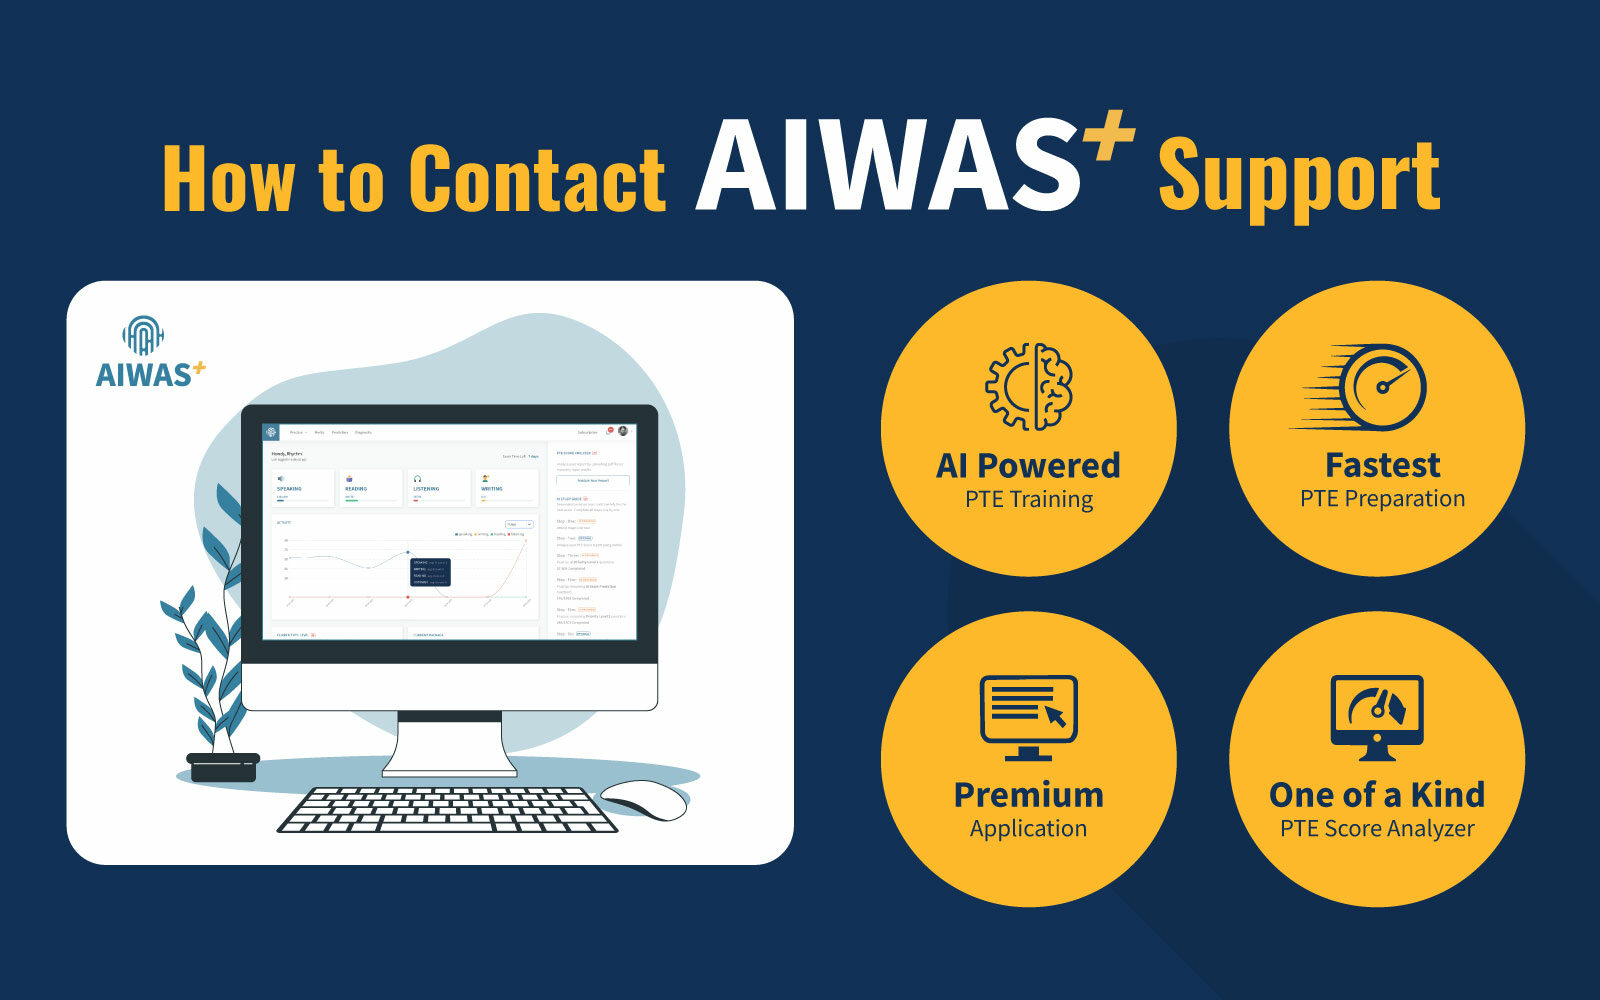 How to Contact AIWAS Plus Support?